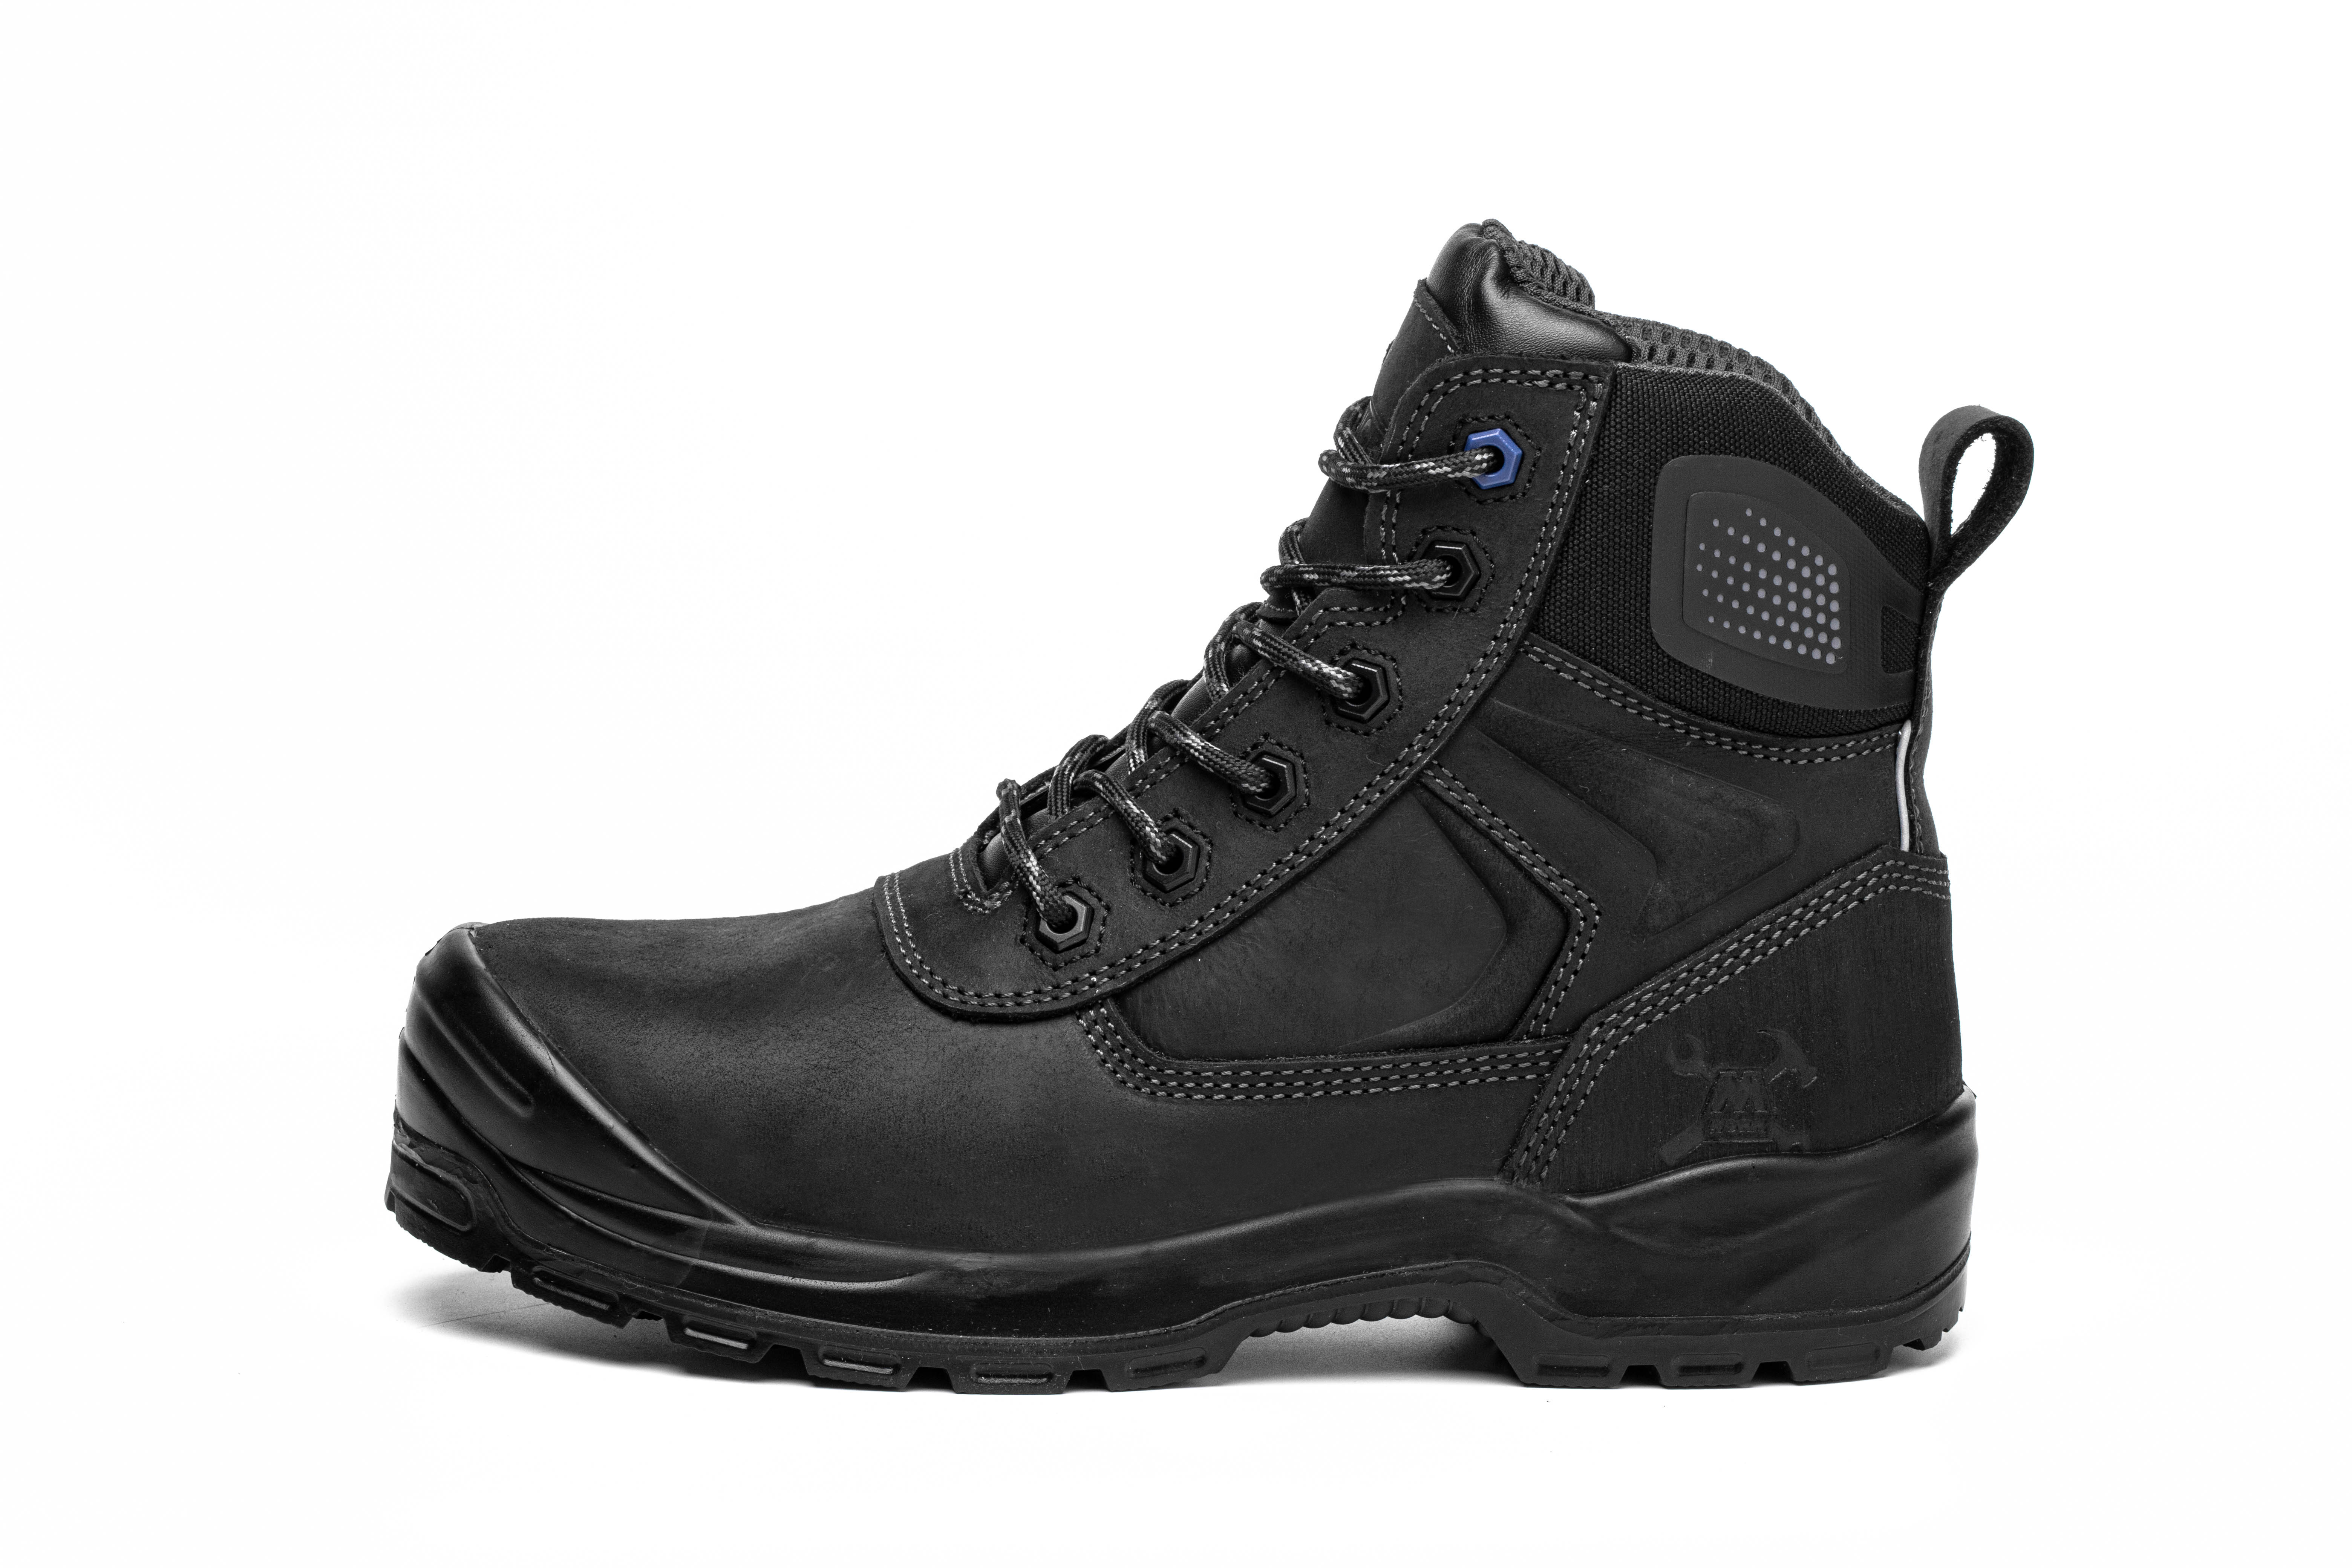 Men's Steel Toe Waterproof Work Boots: A Must-Have for the Job Site